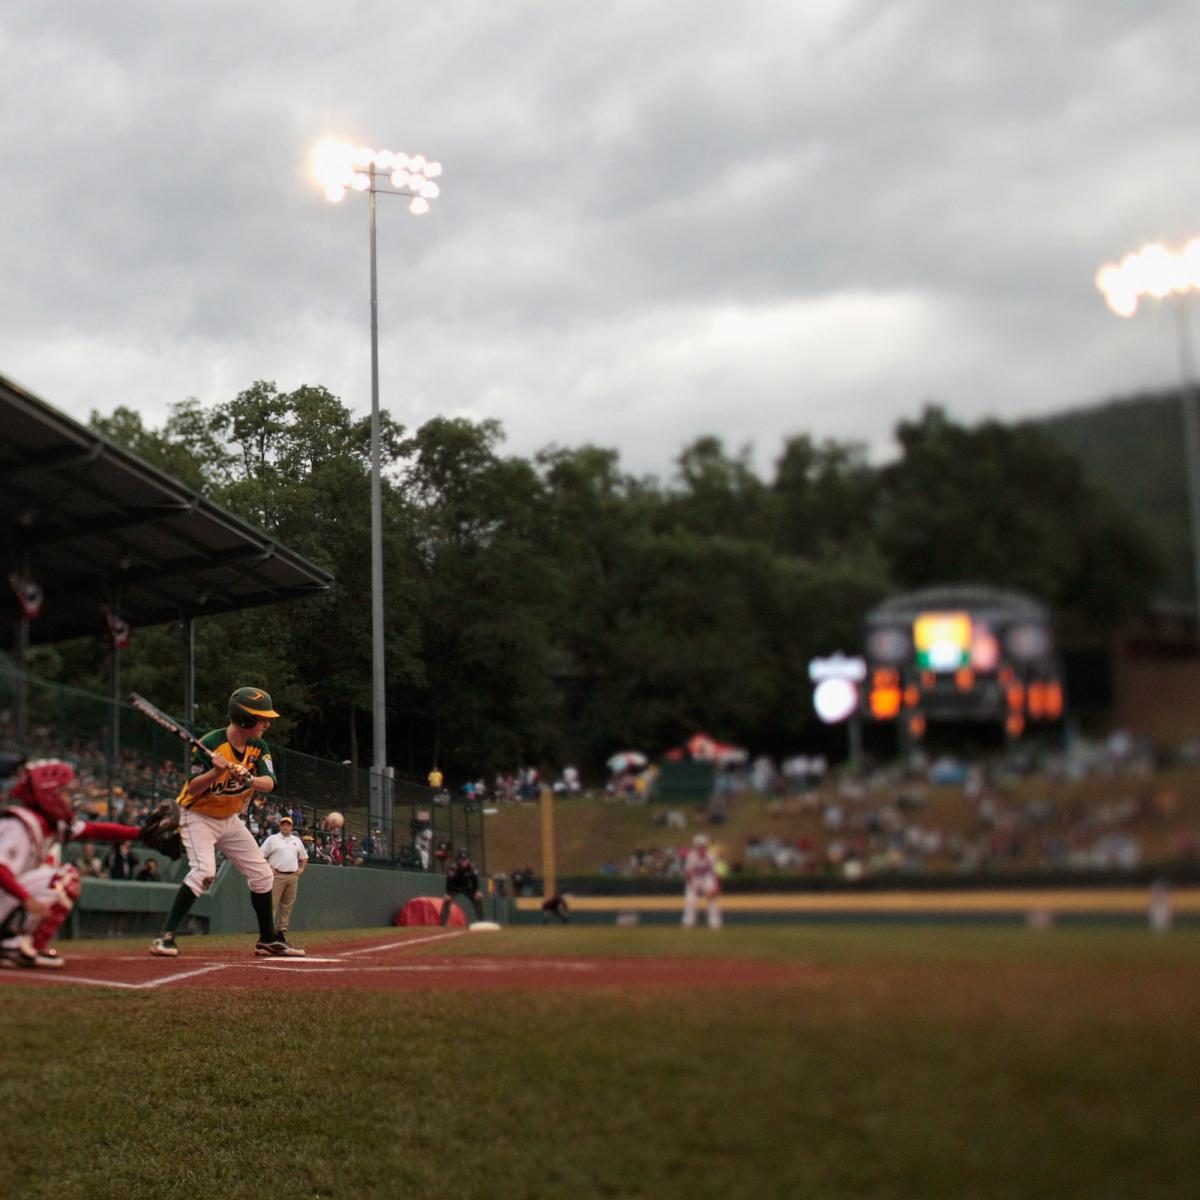 Little League World Series Schedule Complete Viewing Guide to